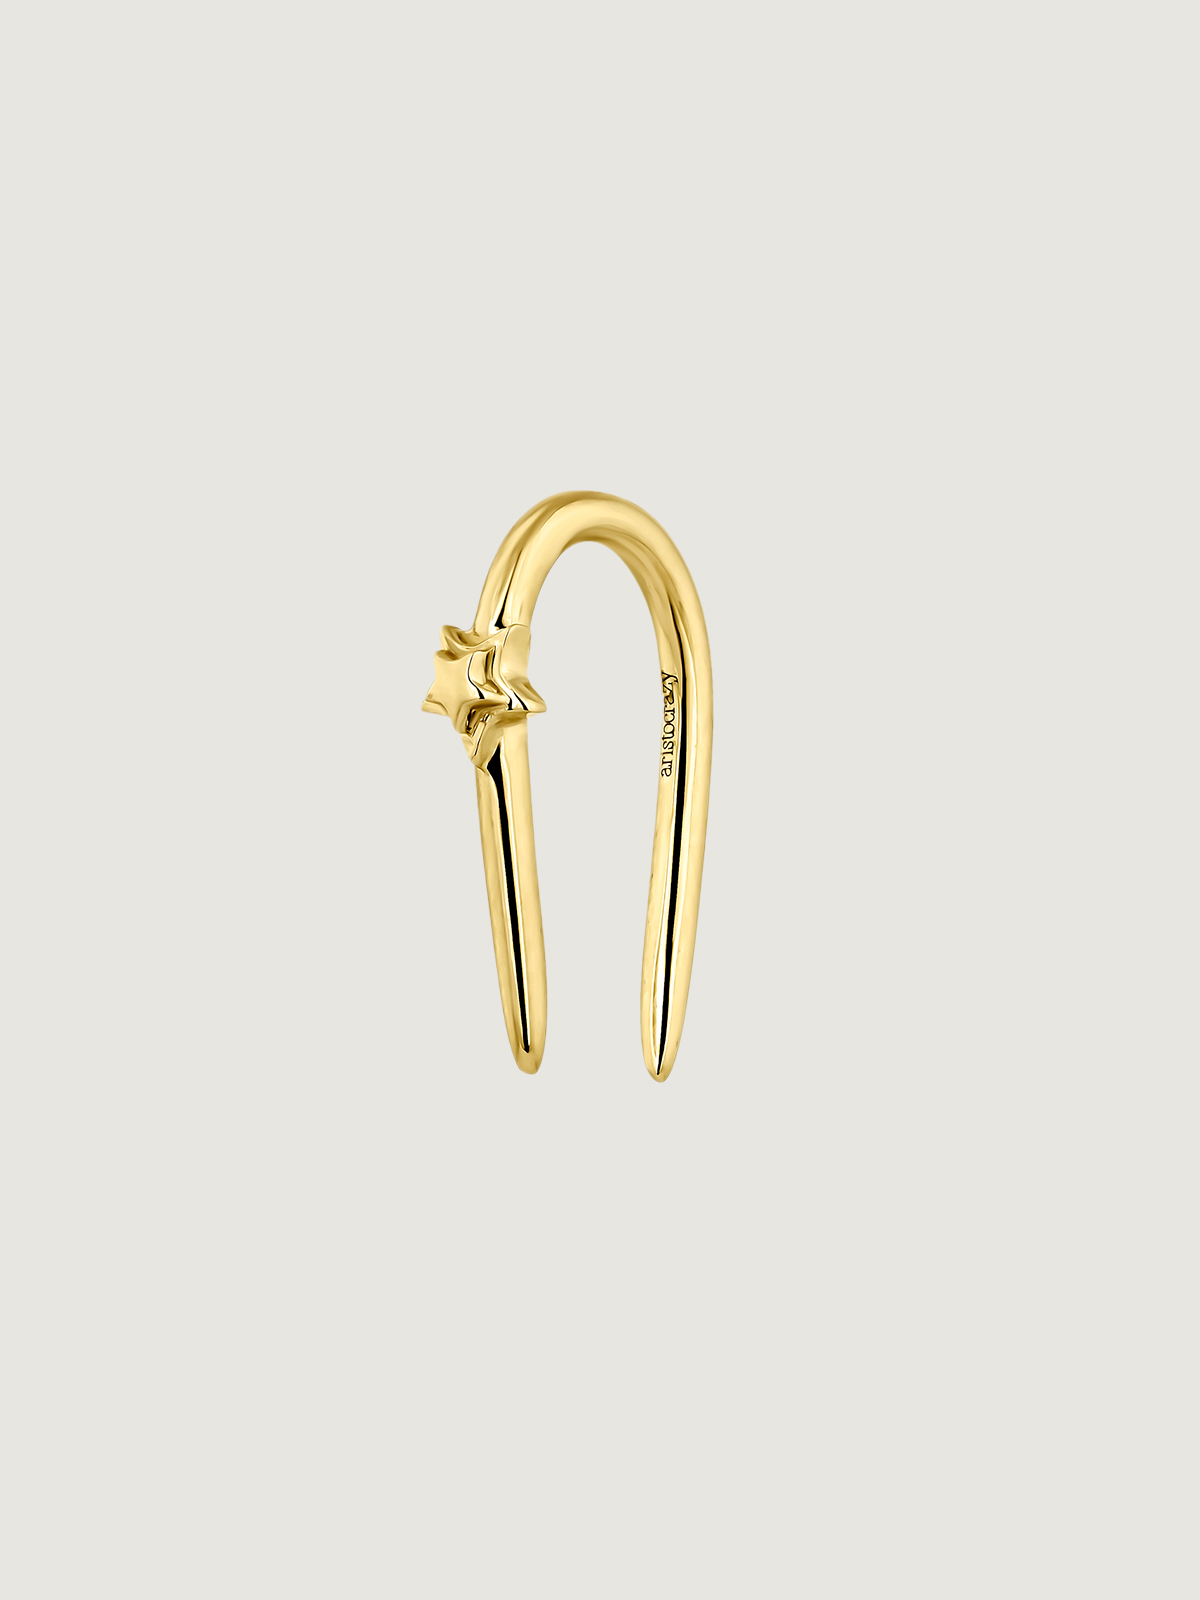 Individual open 9K yellow gold earring with star